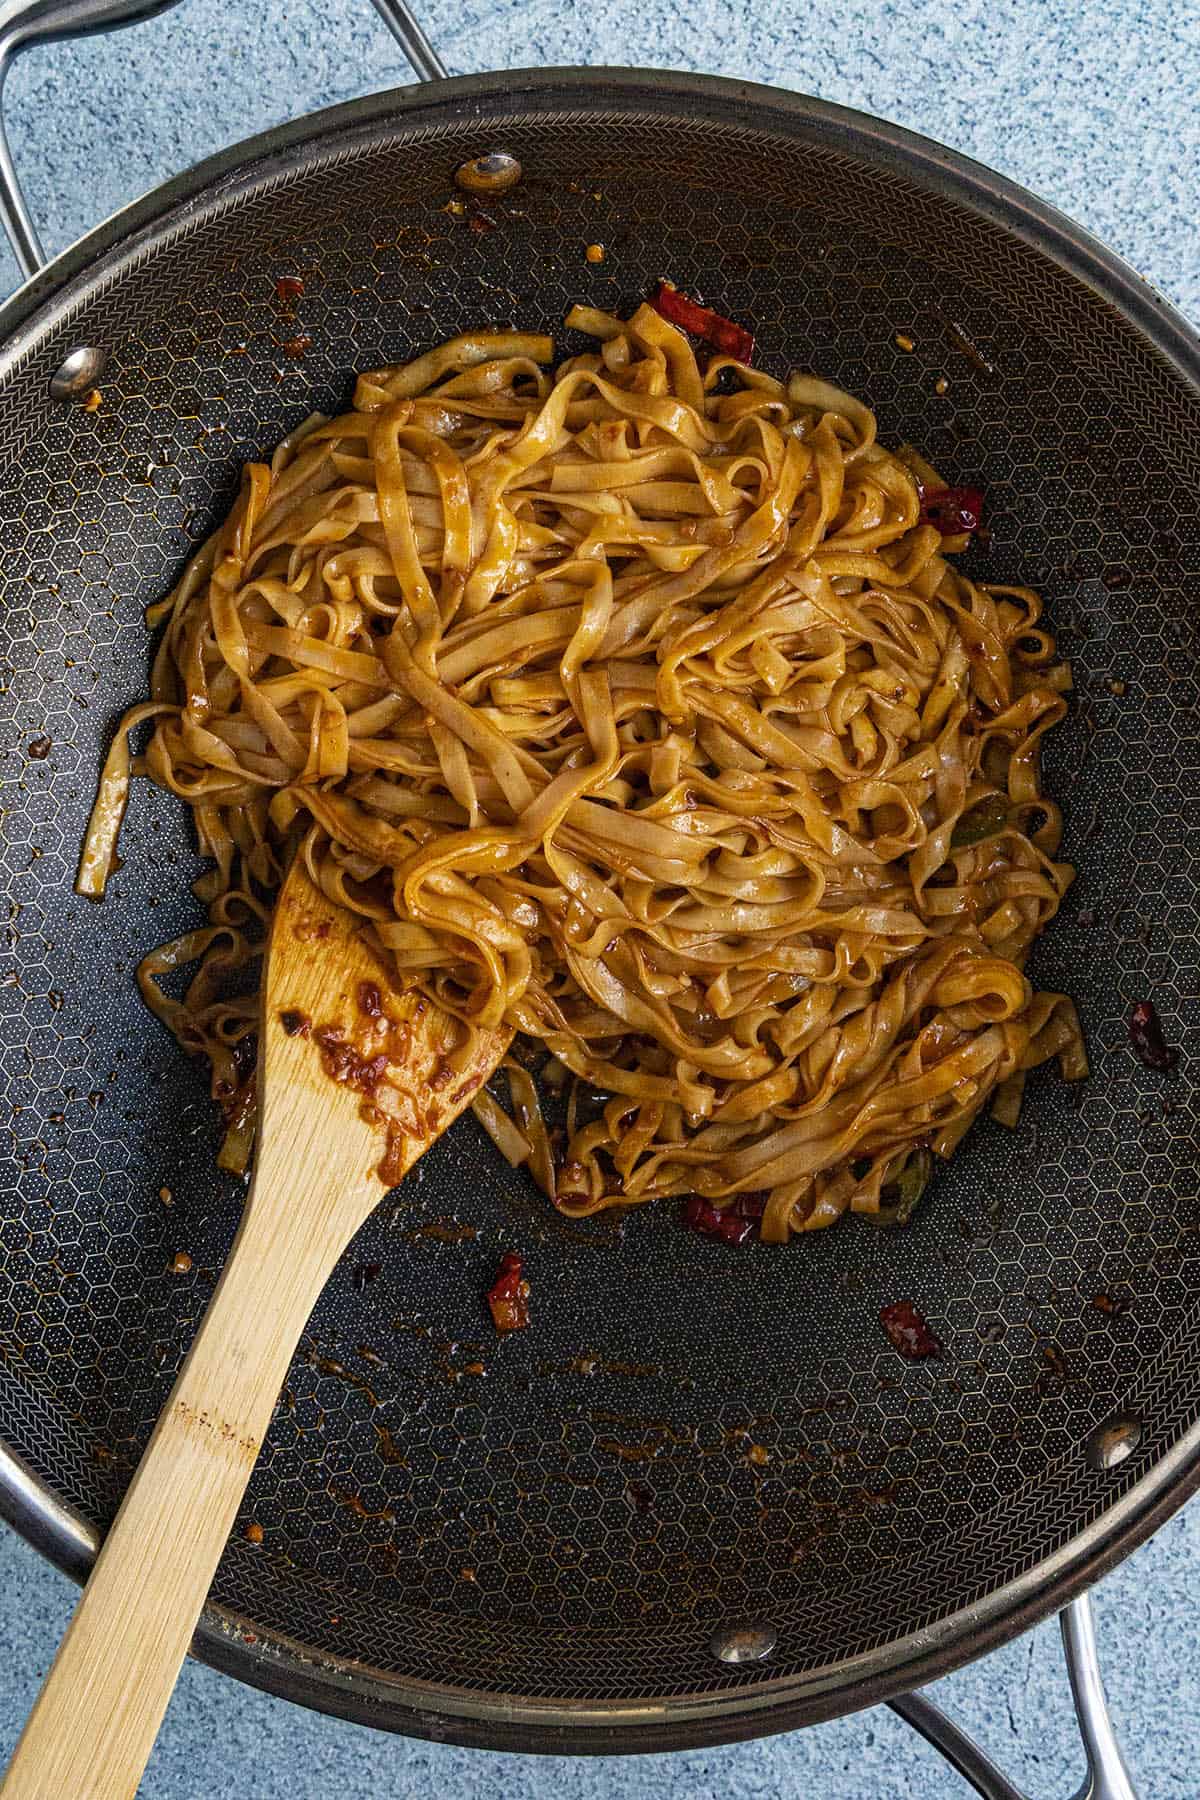 Stir frying the Spicy Noodles in a hot pan